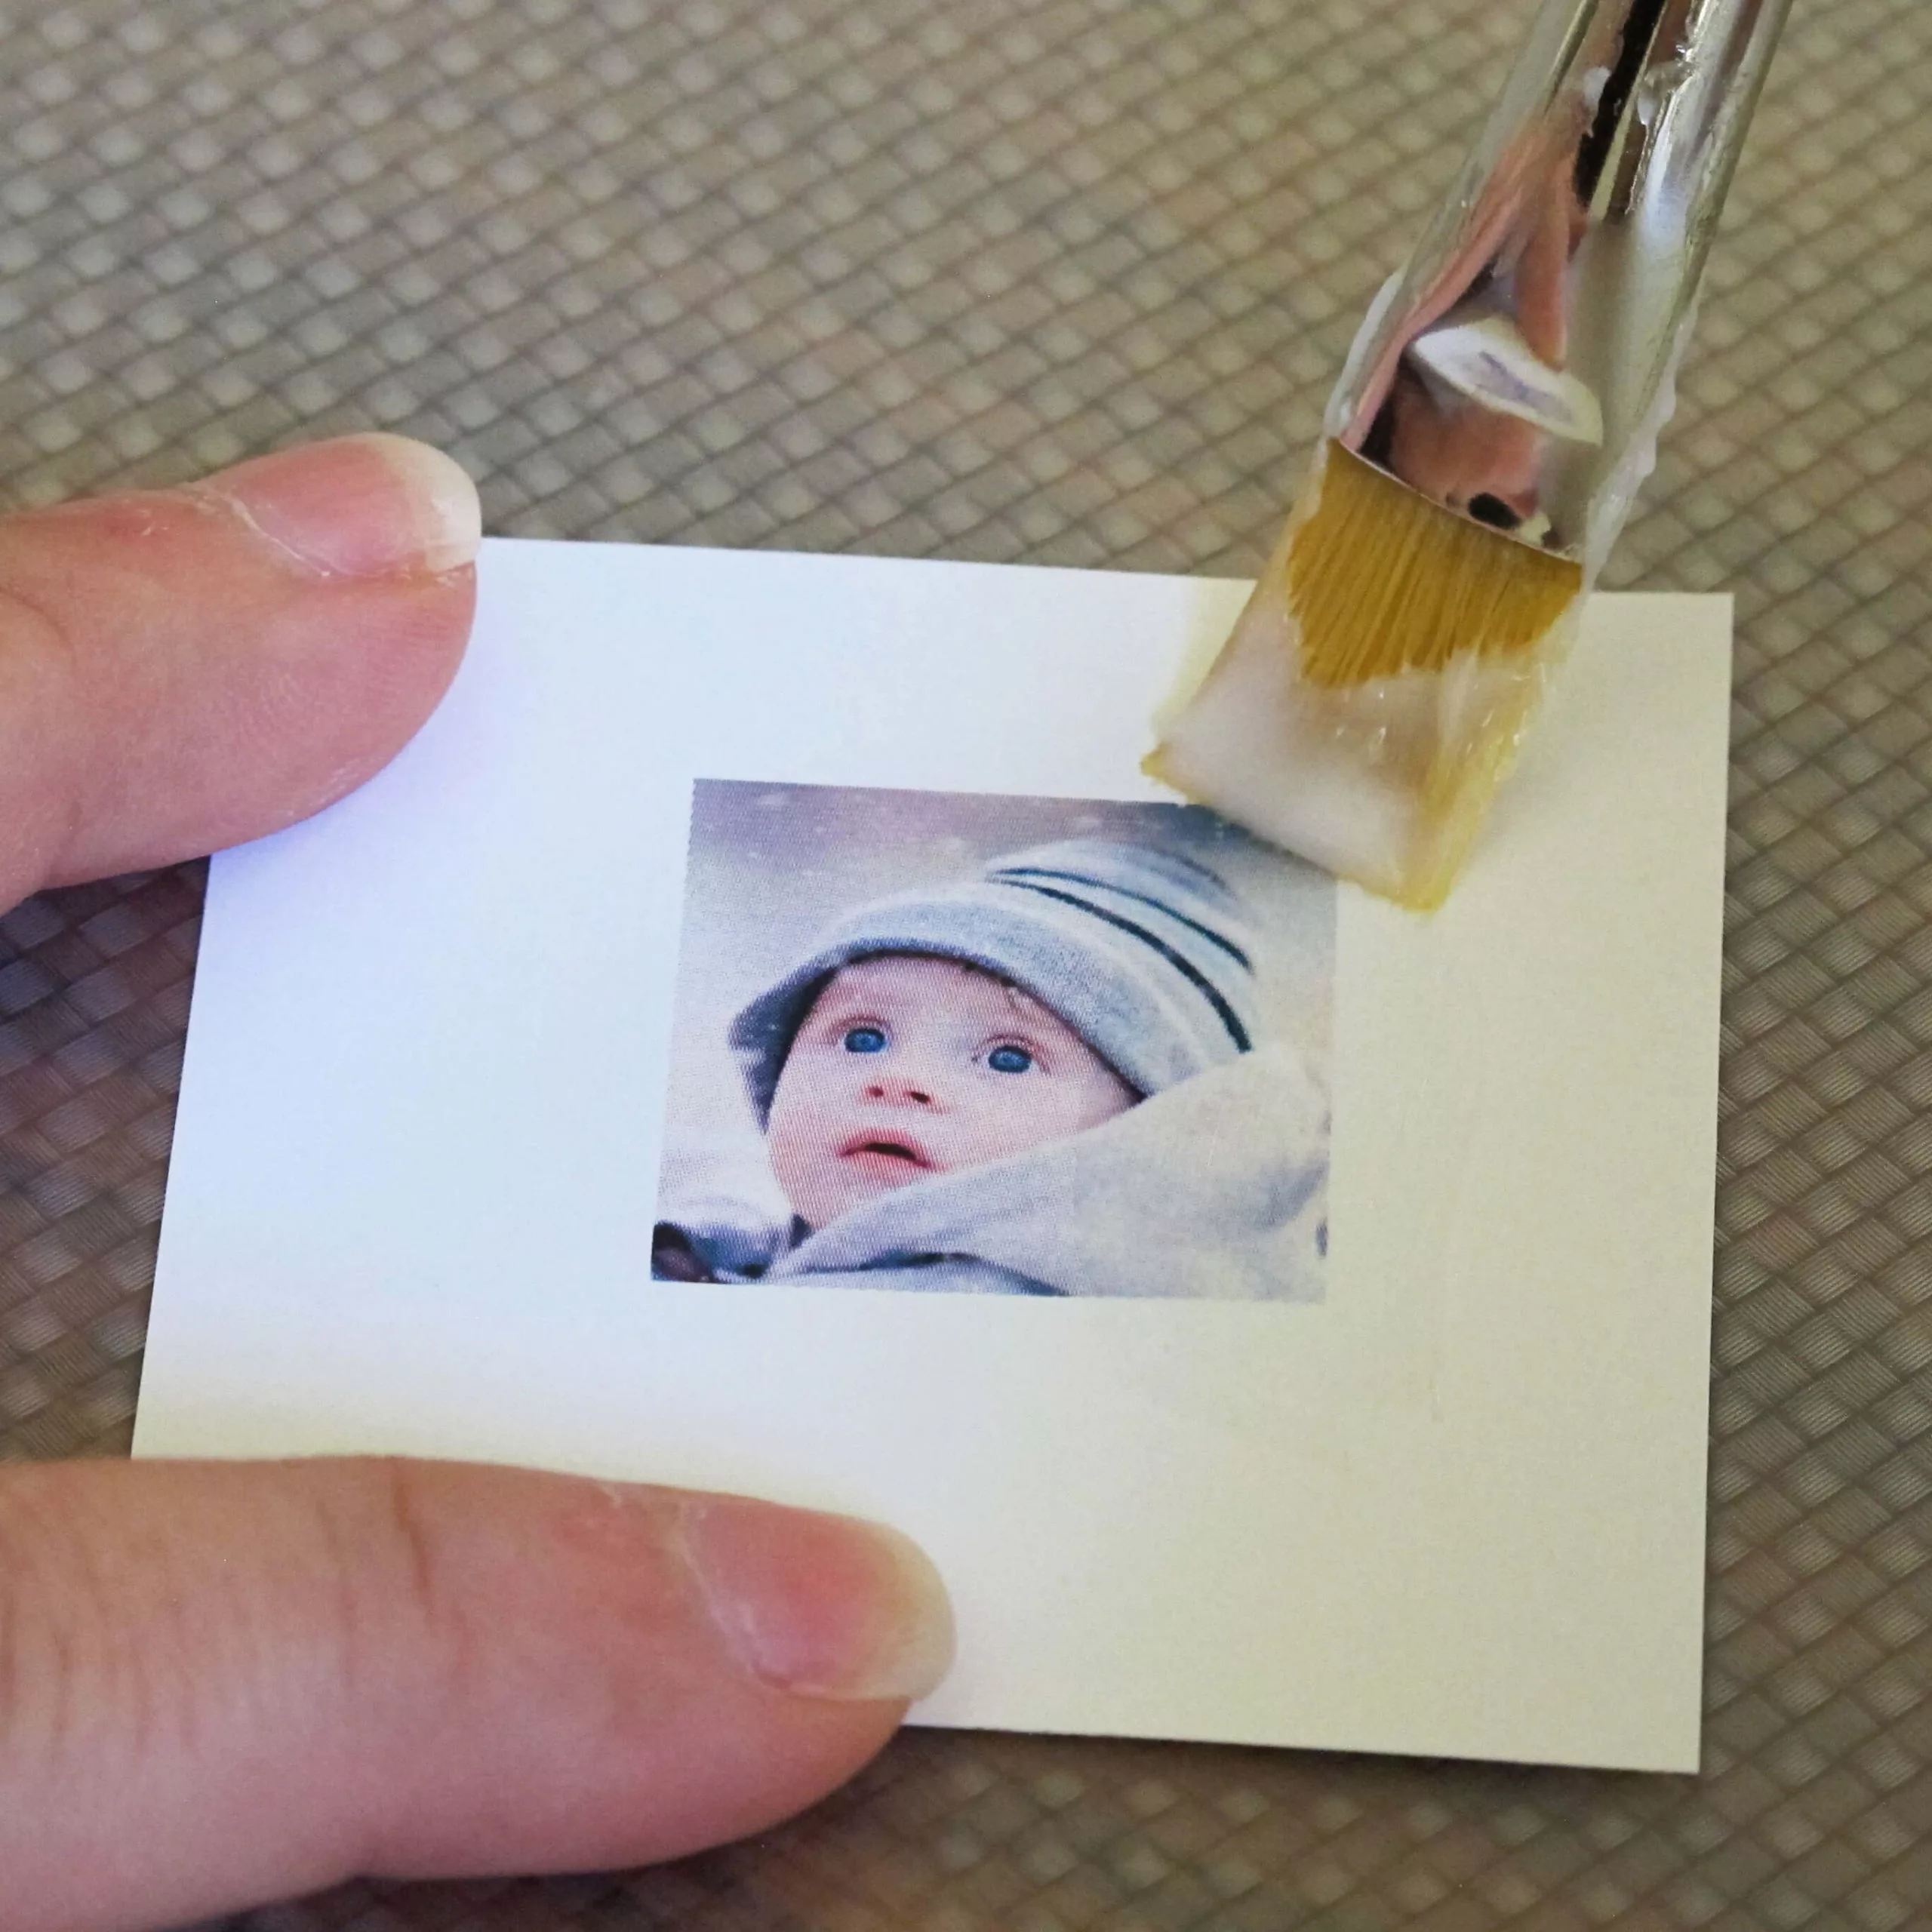 applying a layer of white glue to a photo